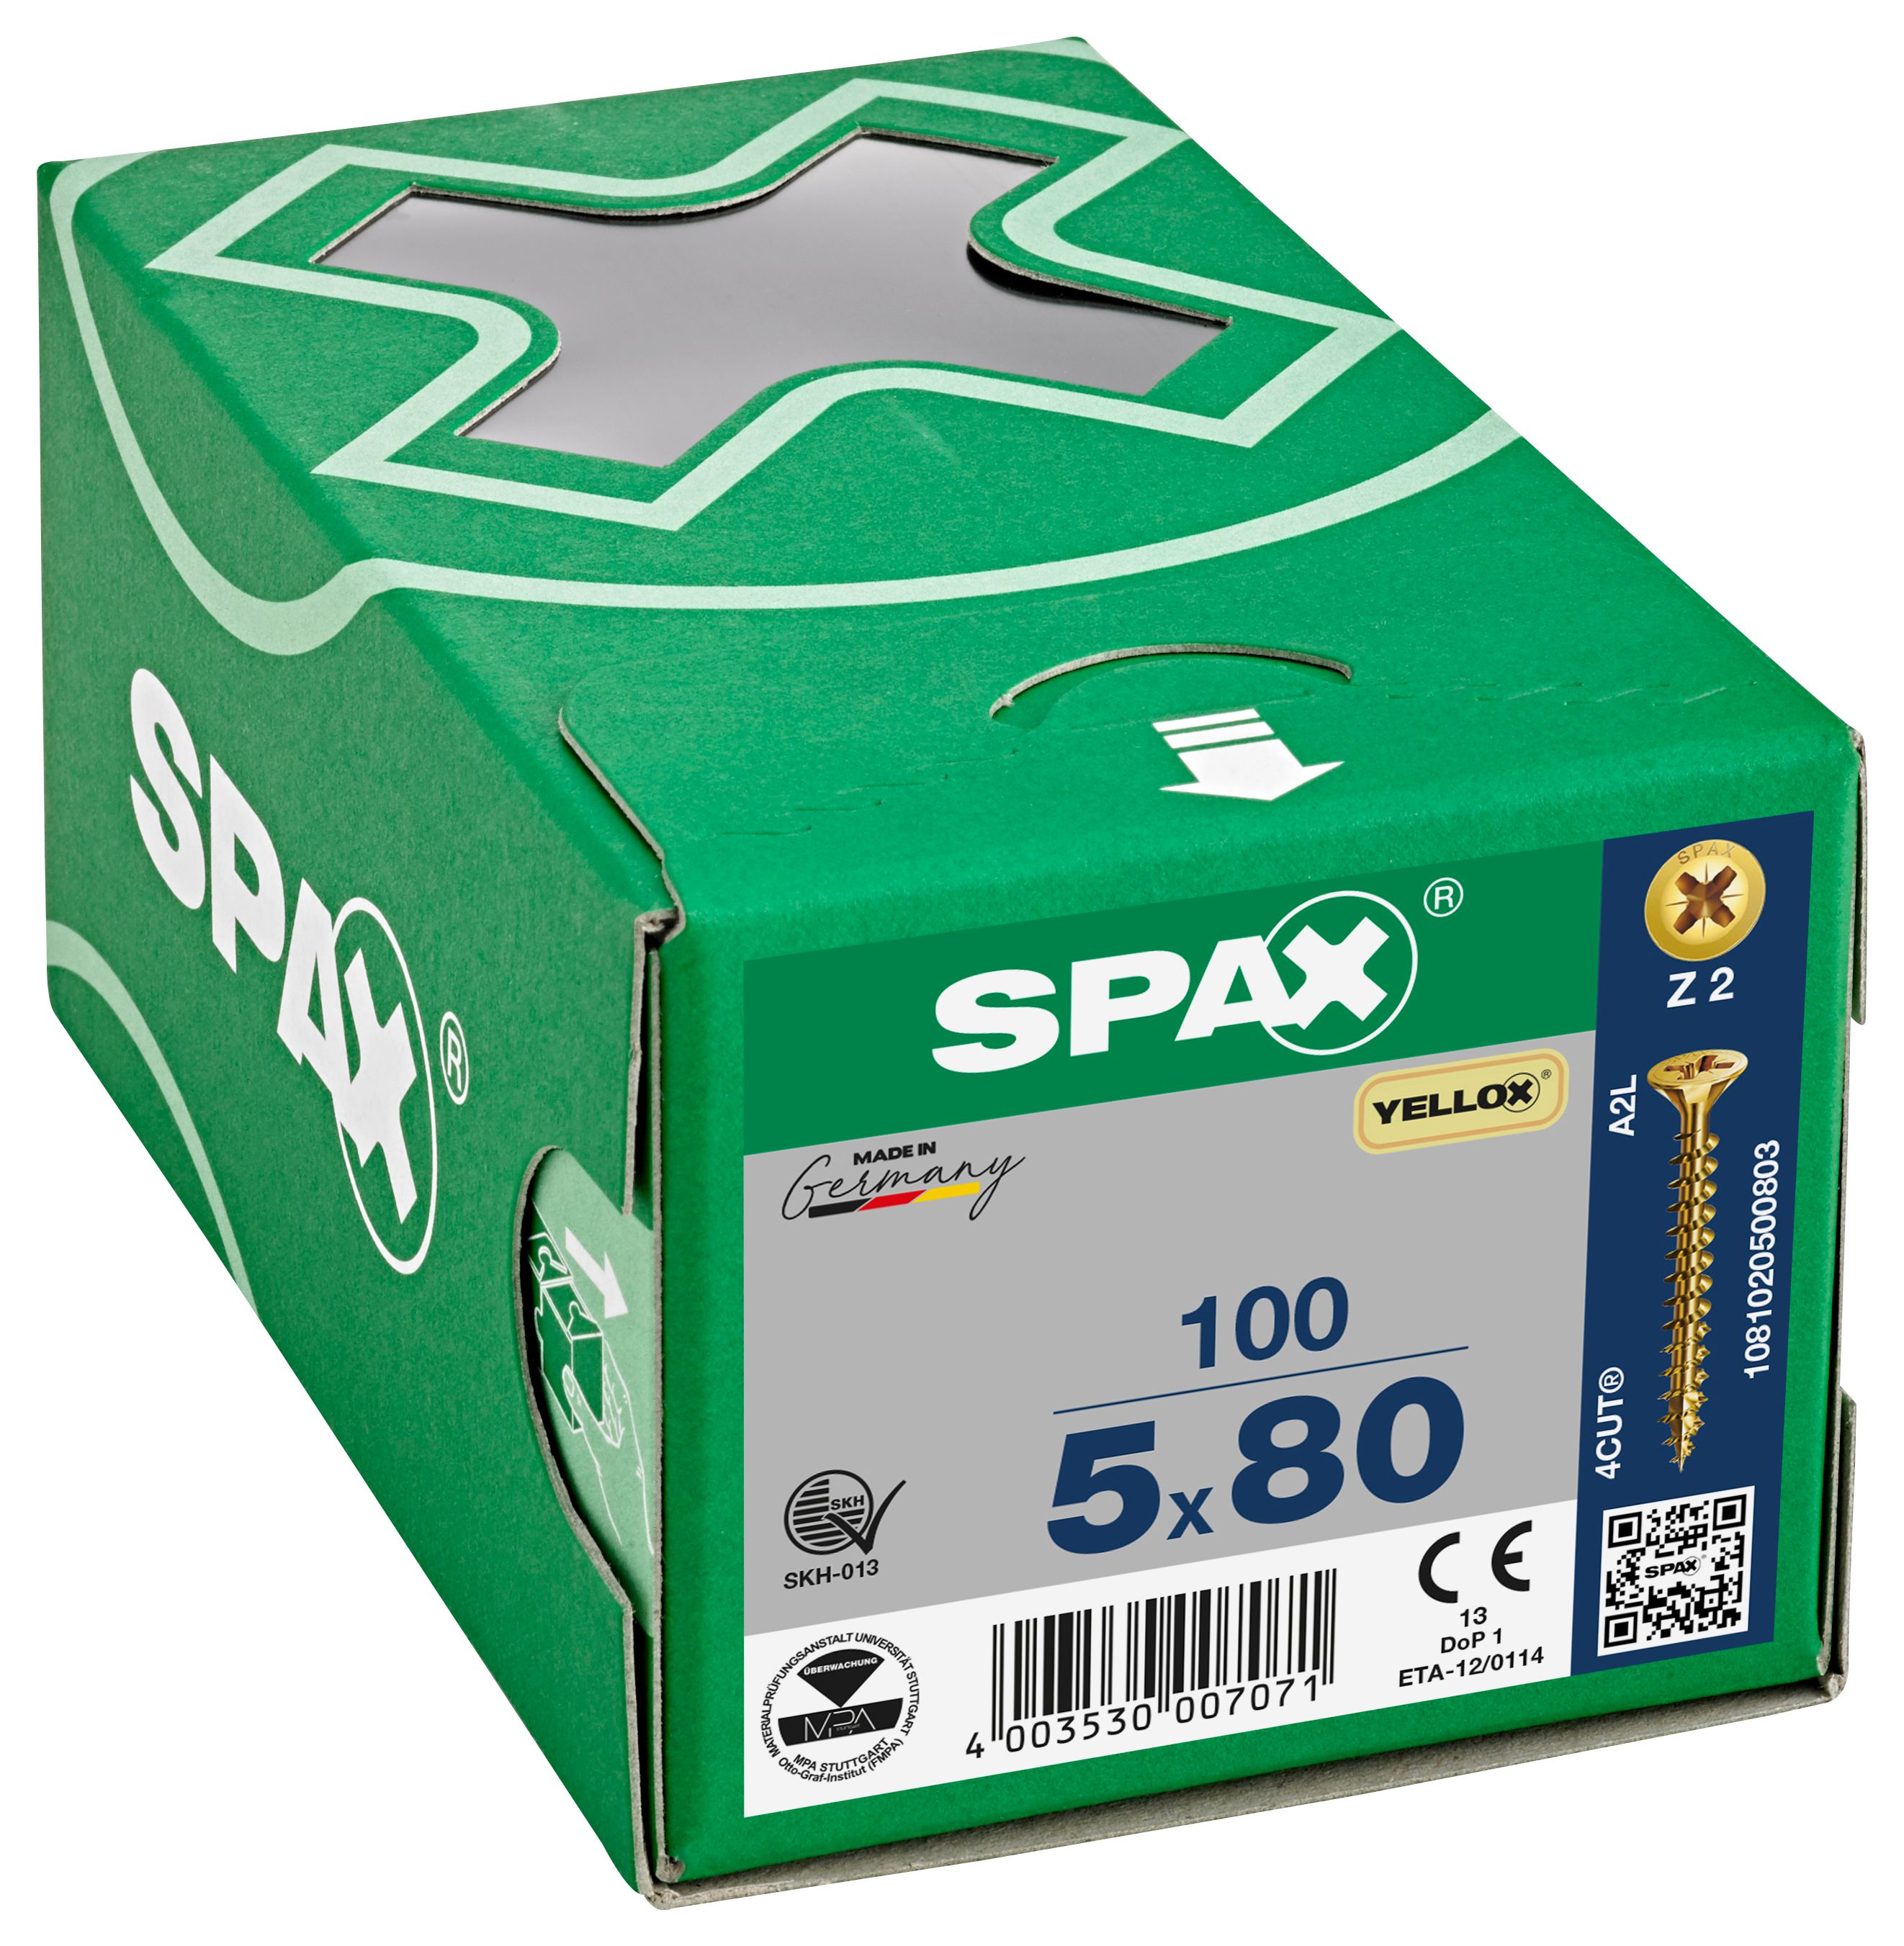 Image of Spax Pz Countersunk Yellox Screws - 5x80mm Pack Of 100